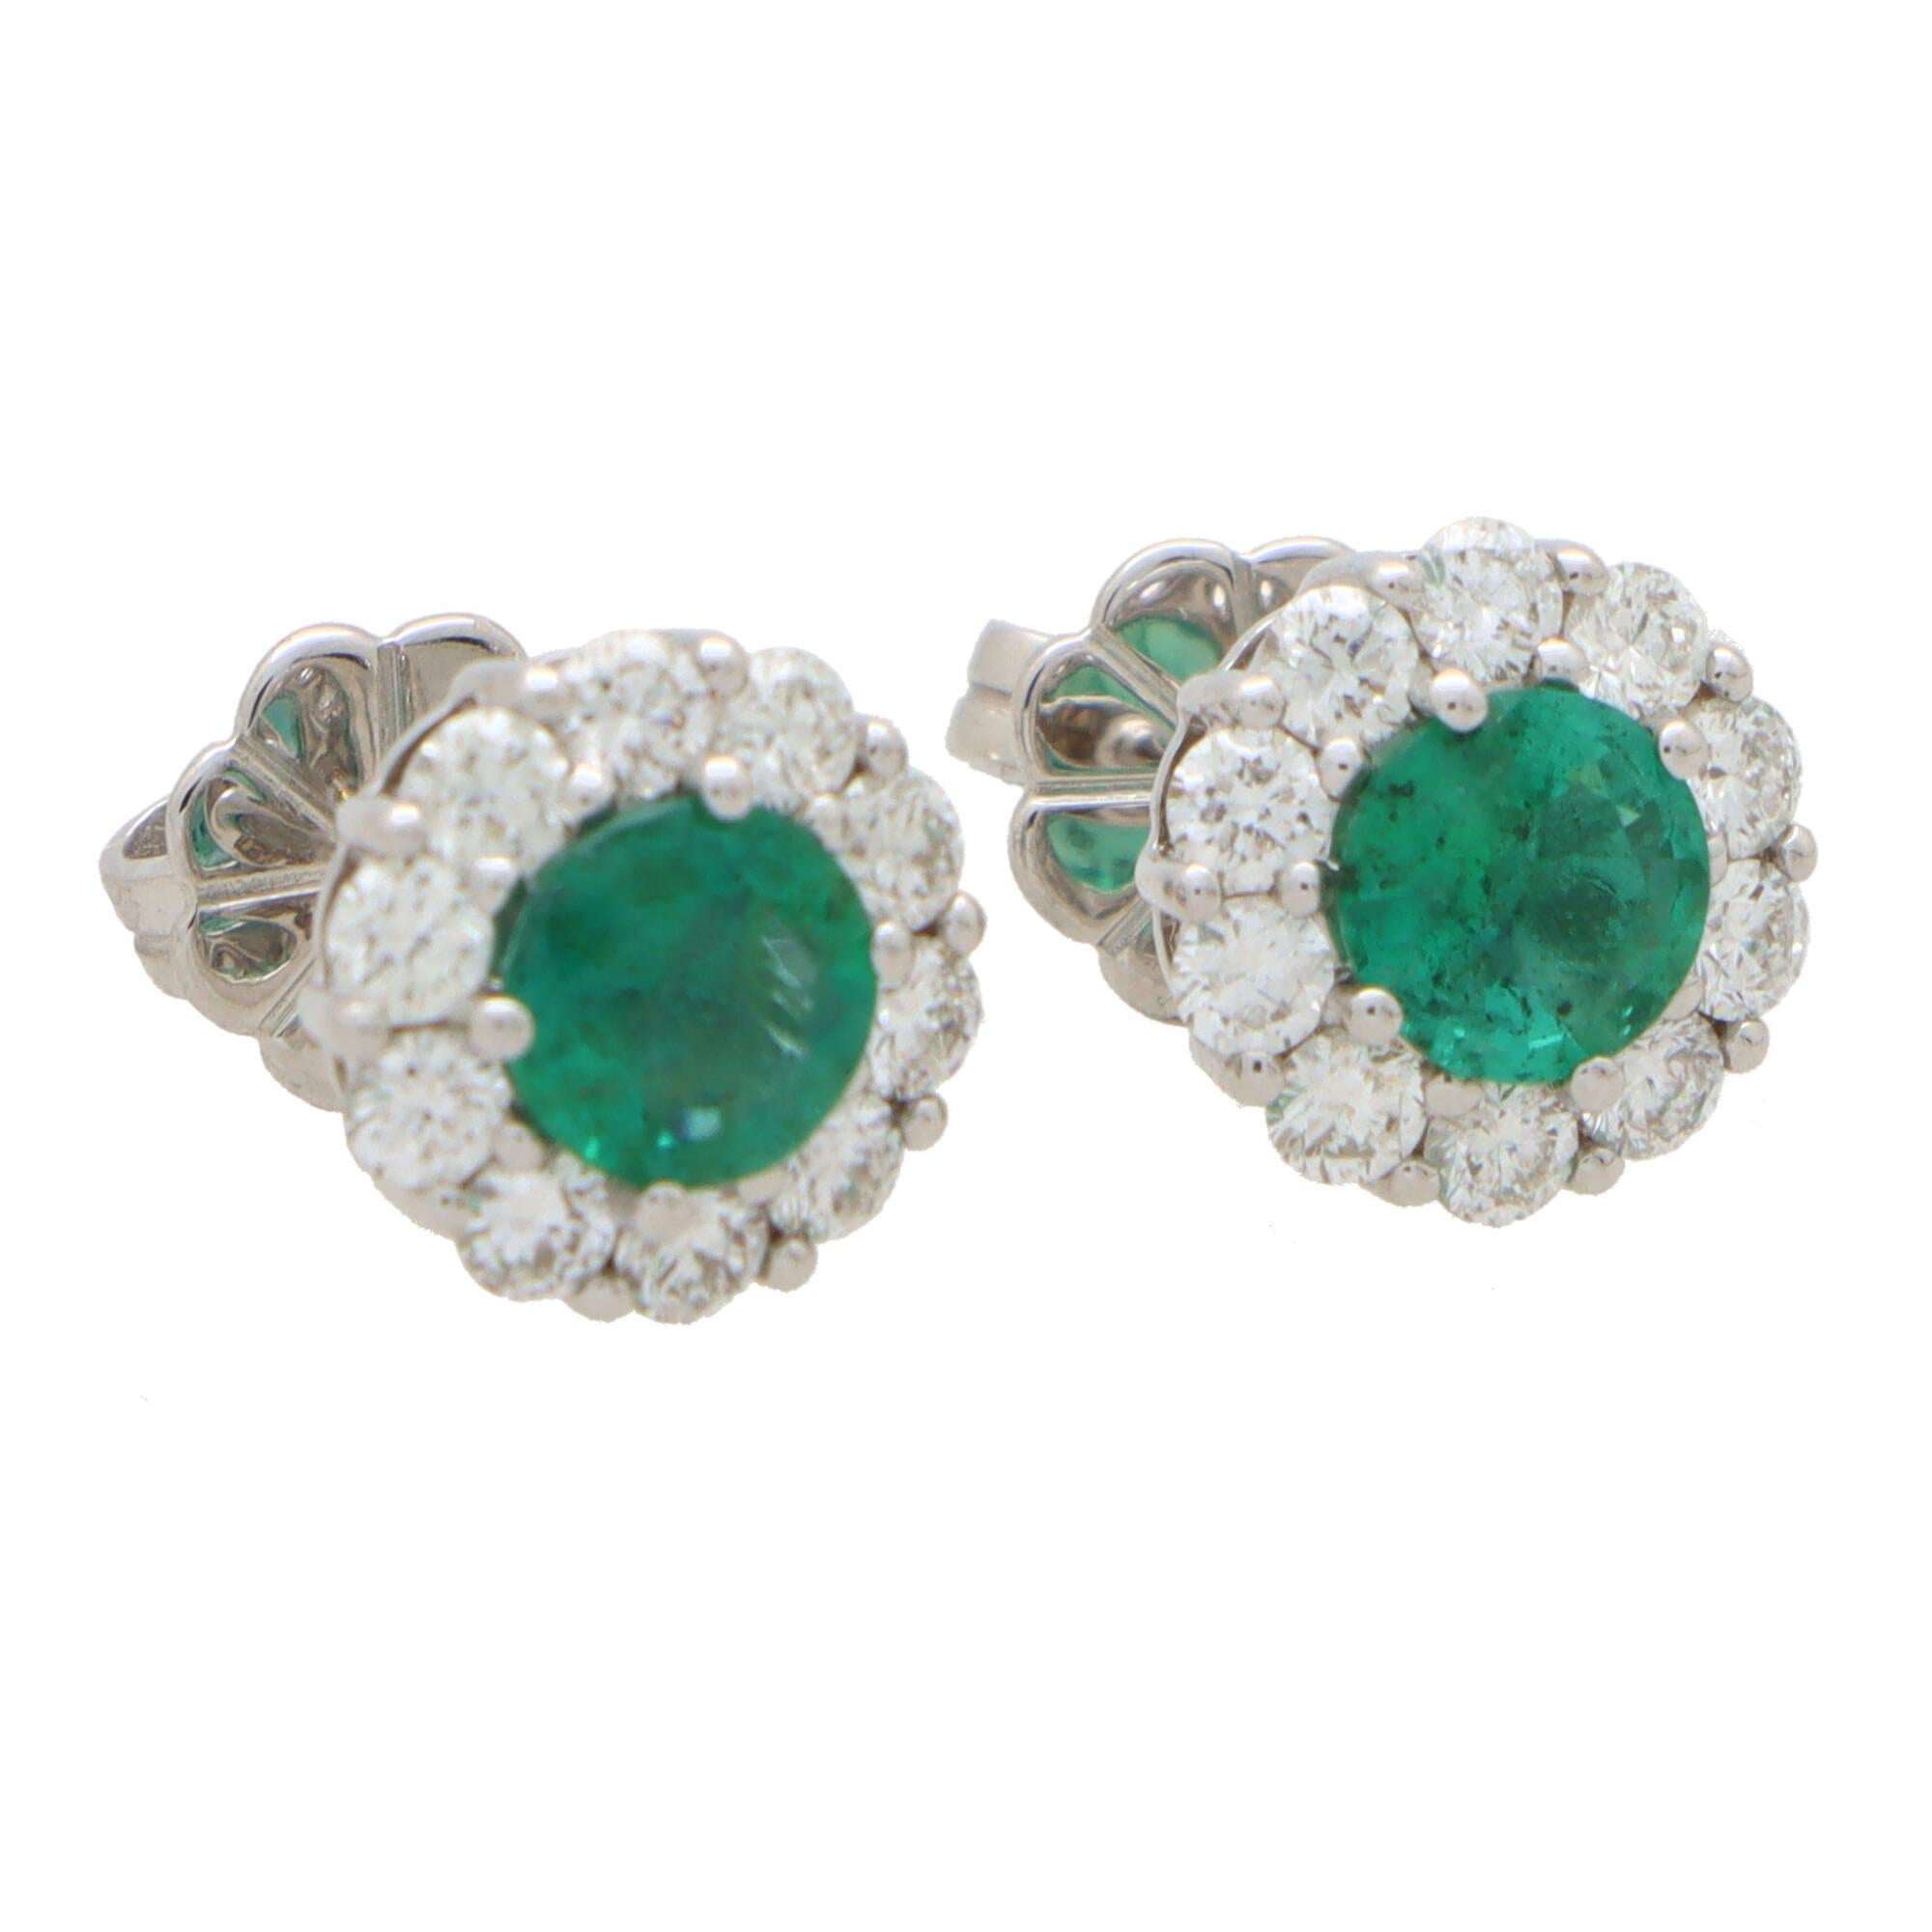 An elegant pair of emerald and diamond cluster stud earrings set in 18k white gold.

Each earring depicts a floral cluster motif centrally set with a vibrant emerald and surrounded by 10 round brilliant cut diamonds. The earrings are secured to